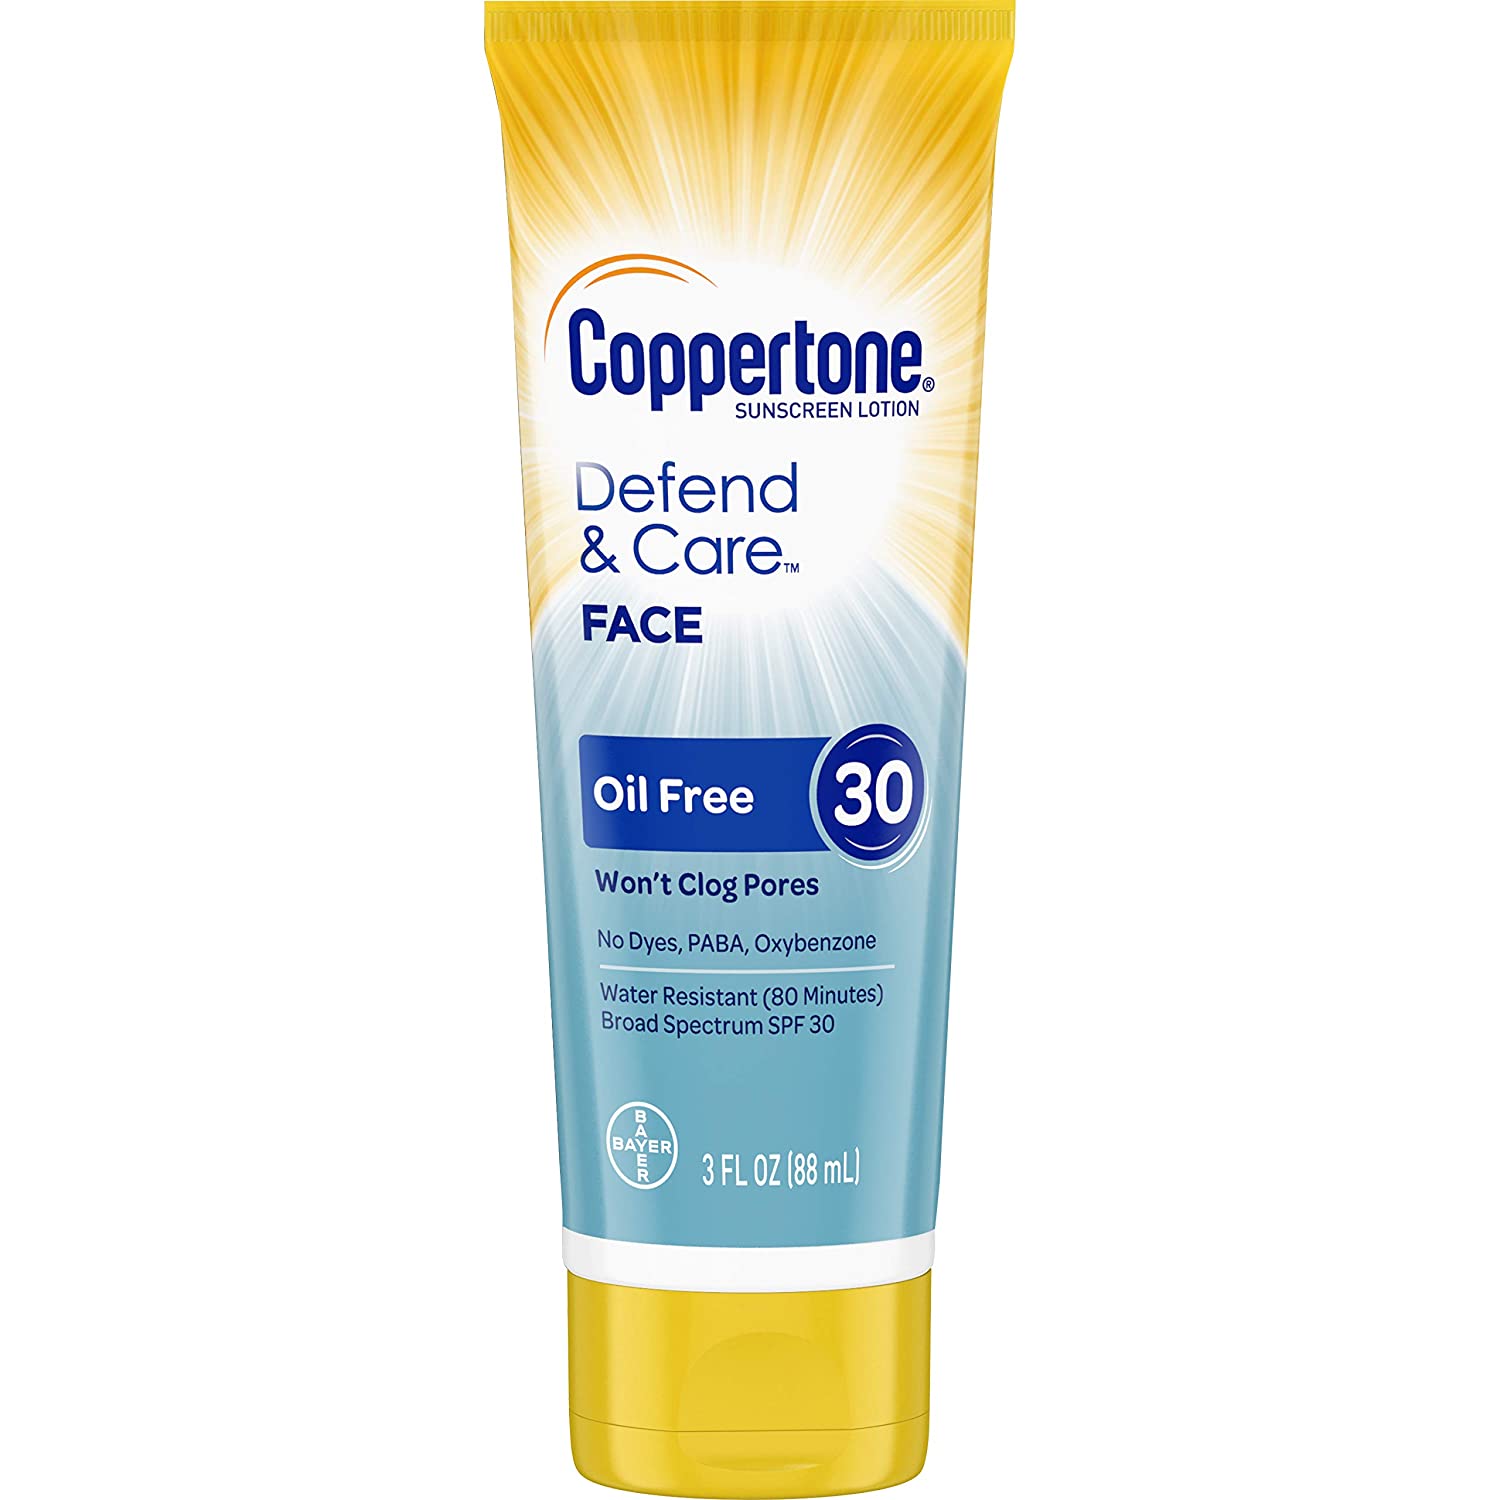 Coppertone Defend & Care Oil Free SUNSCREEN Face Lotion Broad Spectrum SPF 30 (3 Fluid Ounce) (Packa